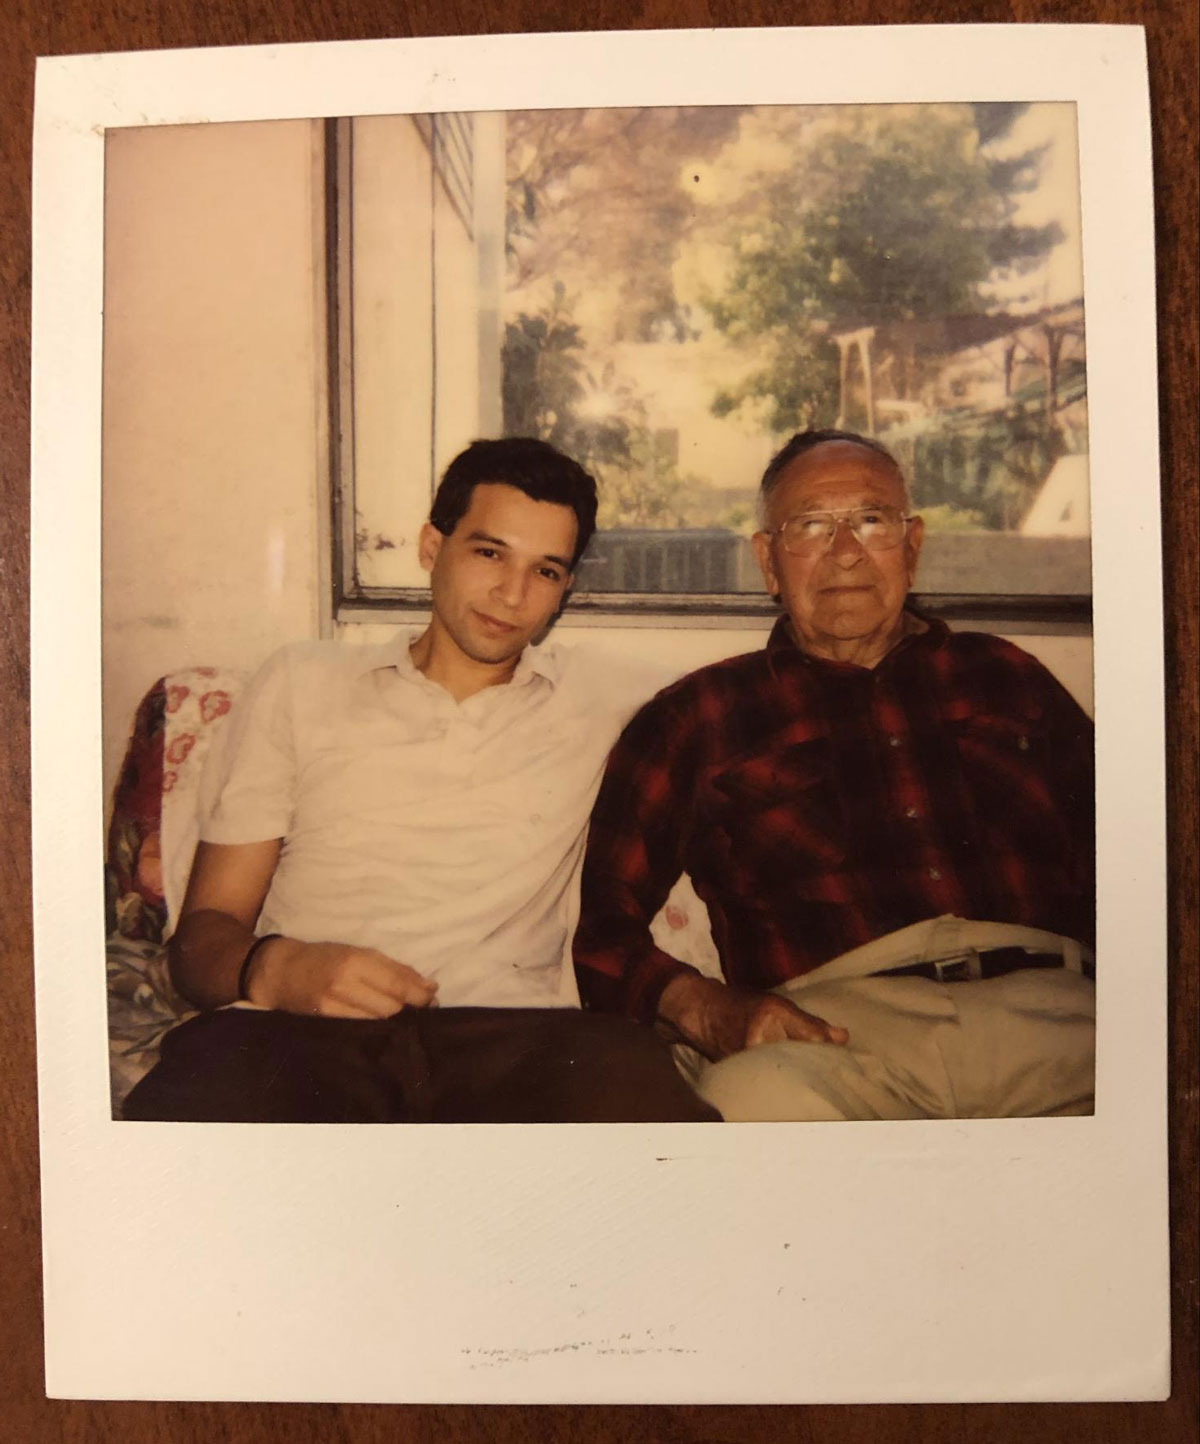 A younger man and an older man sit on a couch together.